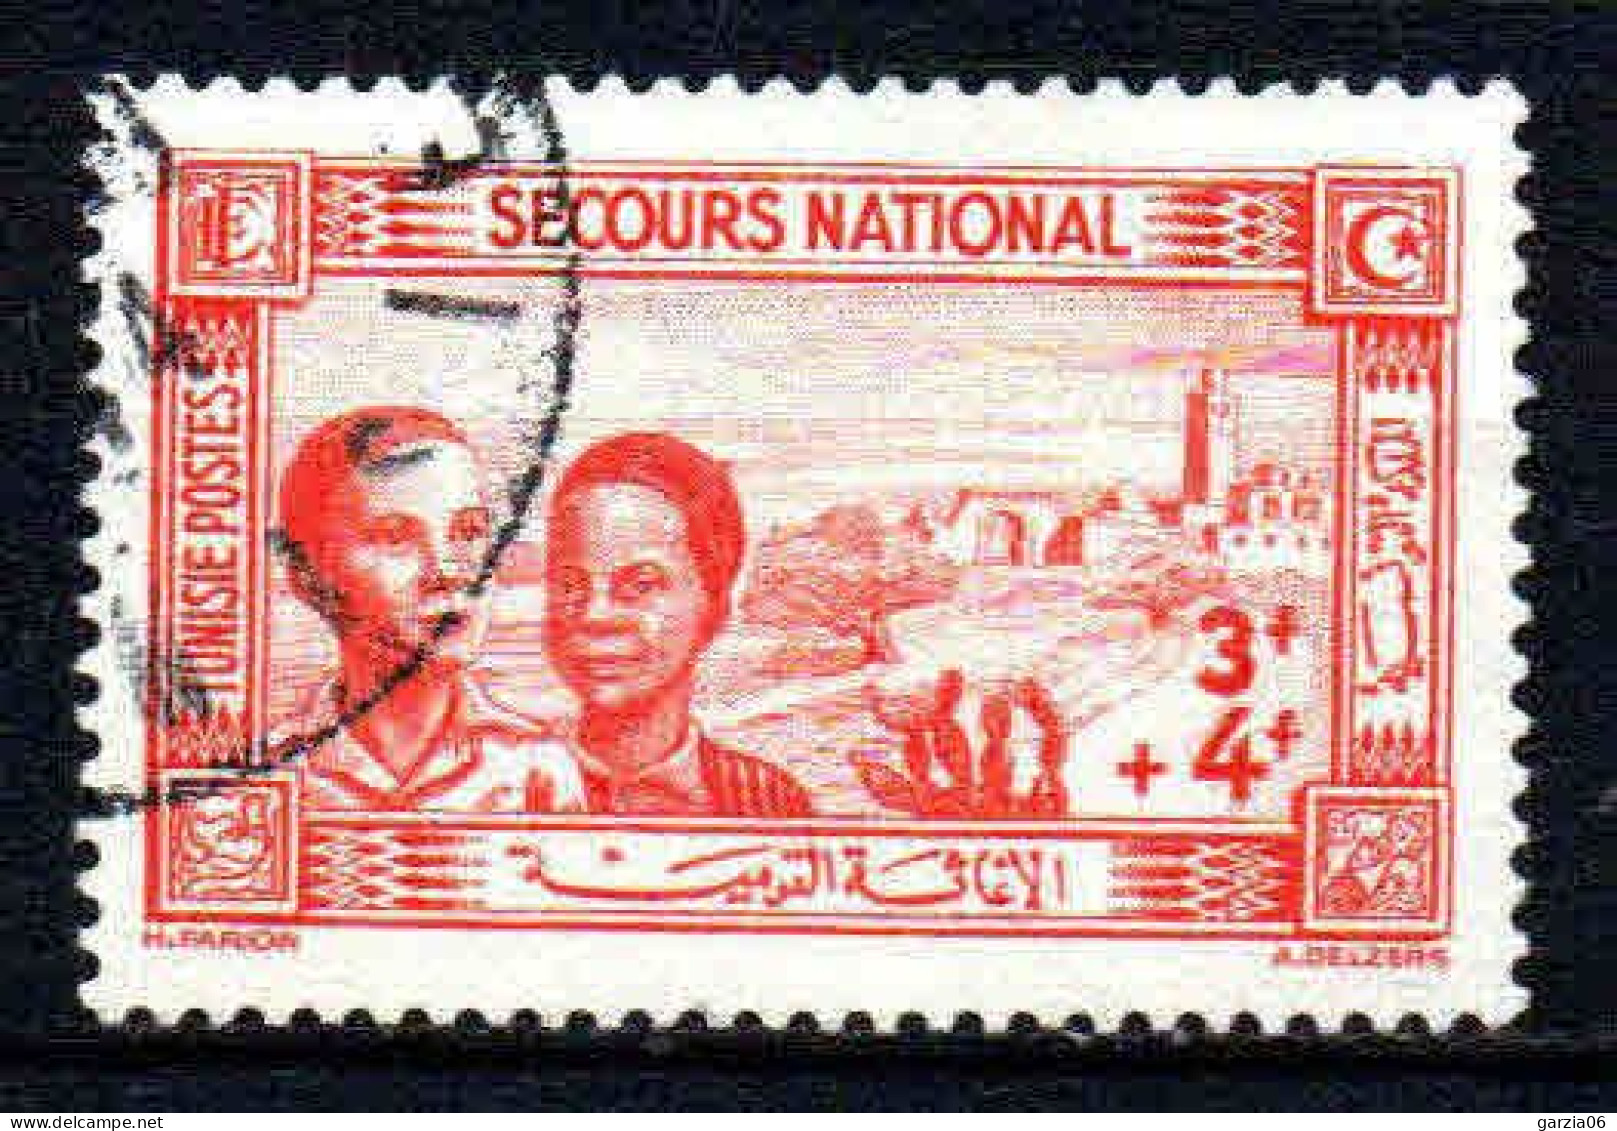 Tunisie  - 1944 - Secours National - N° 248  - Oblit - Used - Usati